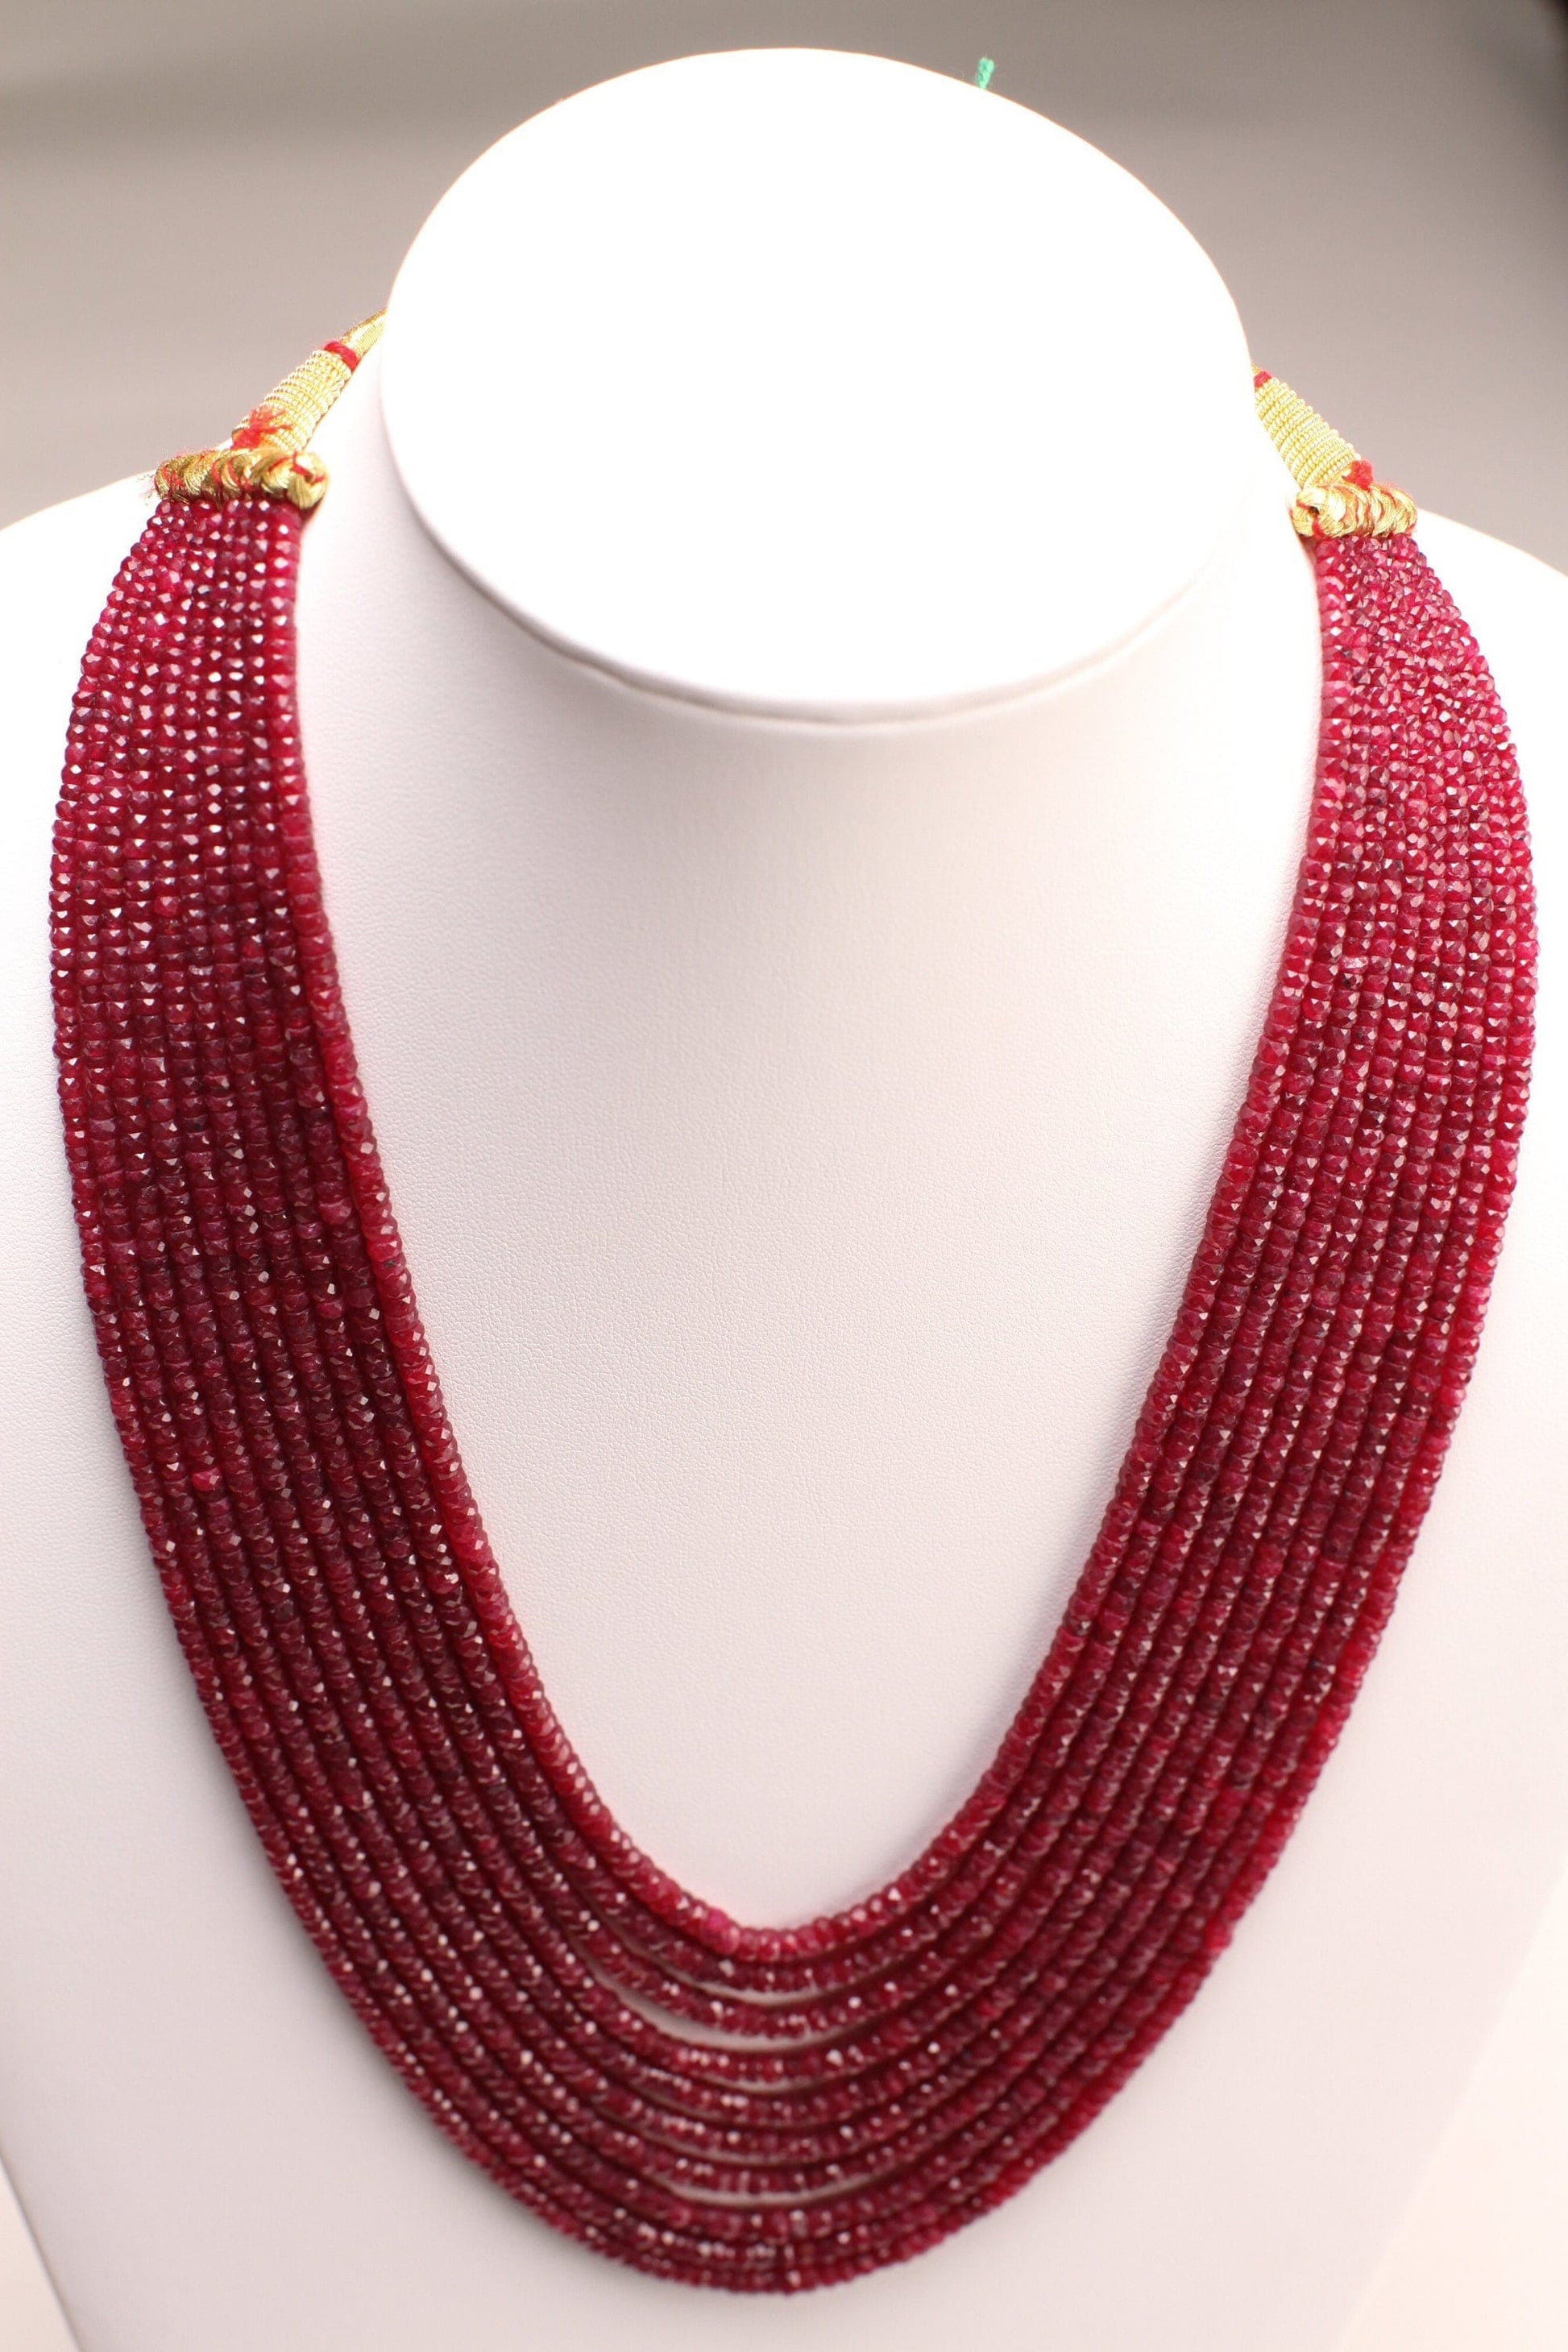 AAA Natural Ruby Gemstones 3-4mm Multi Strand, 5, 7, 8, 9, 10 Line Layer Necklace Adjustable thread to 24&quot; Long, Precious Gift for her.